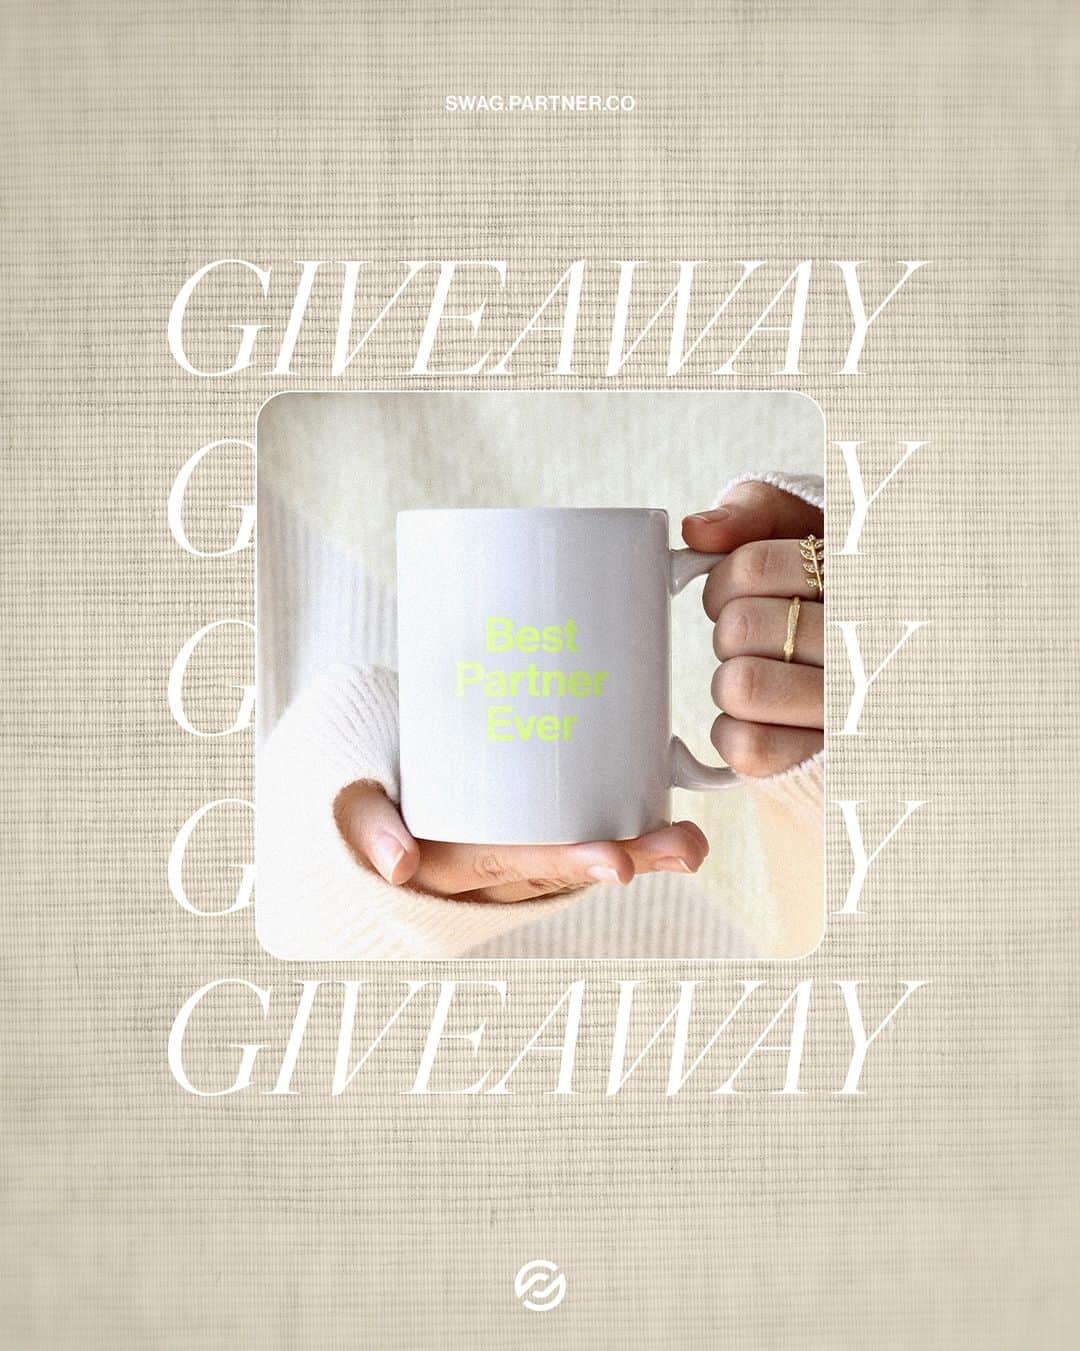 ARIIX Officialのインスタグラム：「☕️ HOT GIVEAWAY ALERT ☕️⁠ ⁠ The best part of waking up could be having “best partner ever” on your cup! How can you make that happen? By entering to win a branded mug as part of our November weekly giveaways.⁠ ⁠ ENTER TO WIN before 11:59 p.m. MT Nov. 22, 2023. Here’s how:⁠ ✨Follow @PartnerCoGlobal, @JohnWadsworthPC and @DarrenZobrist⁠ ✨Like this giveaway post⁠ ✨Tag a friend in the comments⁠ ✨Get bonus entries for sharing this to your story⁠ ⁠ #PartnerCo #Giveaway #Mug #MugLife ⁠ ⁠ This promotion is not sponsored, administered or associated with Instagram in any way. The winner will be notified on Nov. 27, 2023, via a direct message from @PartnerCoGlobal. The winner has 48 hours to claim the prize, or a new winner will be chosen. Open to all U.S. and Canada residents (excluding Quebec), 18 years of age and older.⁠」